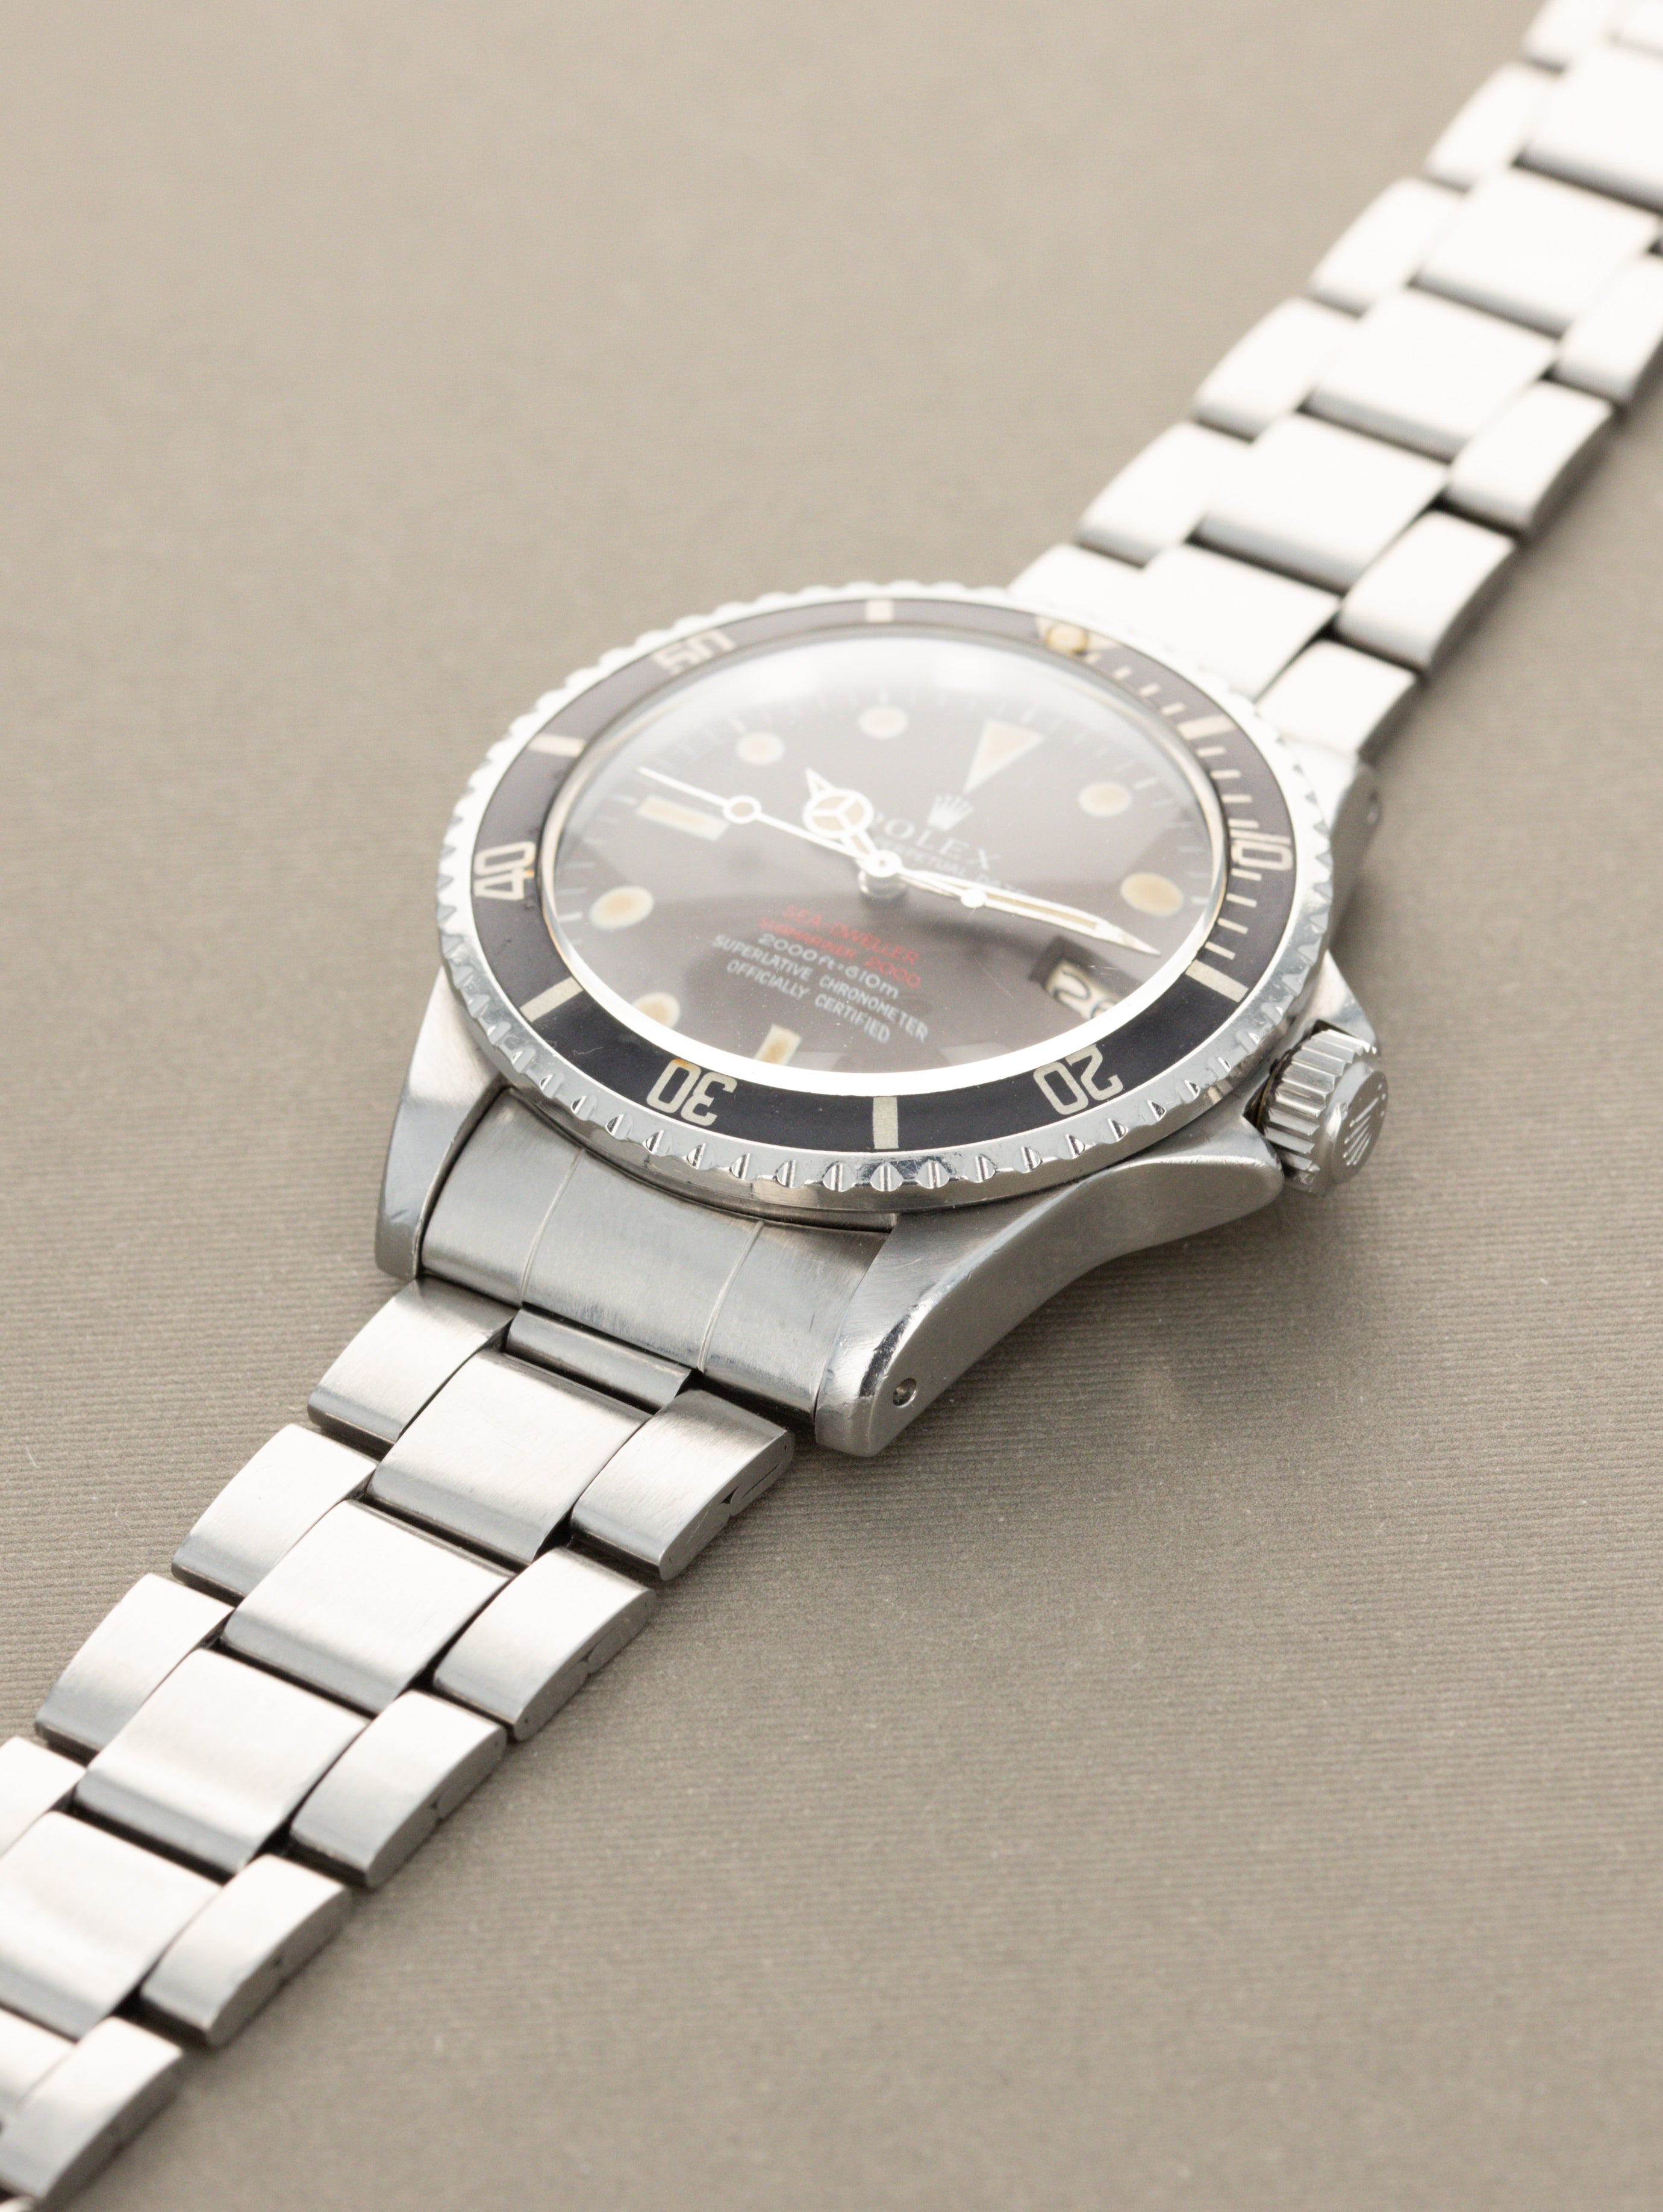 Rolex Sea-Dweller Ref. 1665 - 'Double Red Tropical MK2 Dial Thin Case'